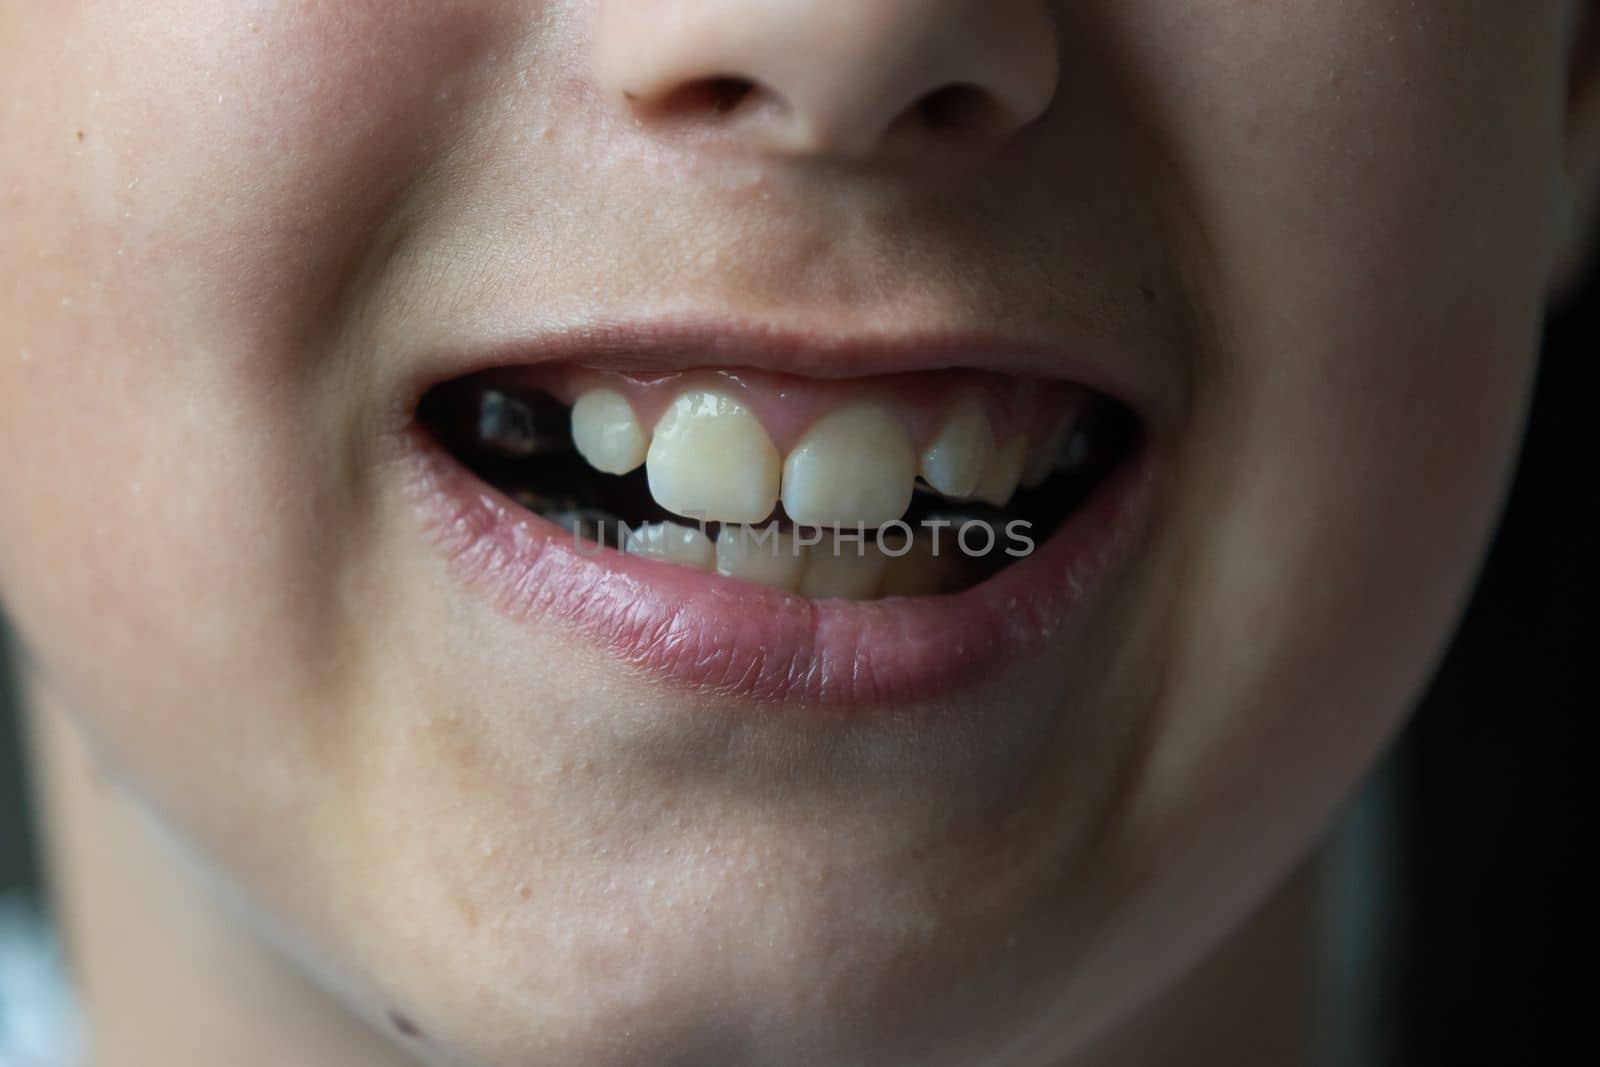 a little girl with a shifted dentition demonstrates her teeth by Andelov13